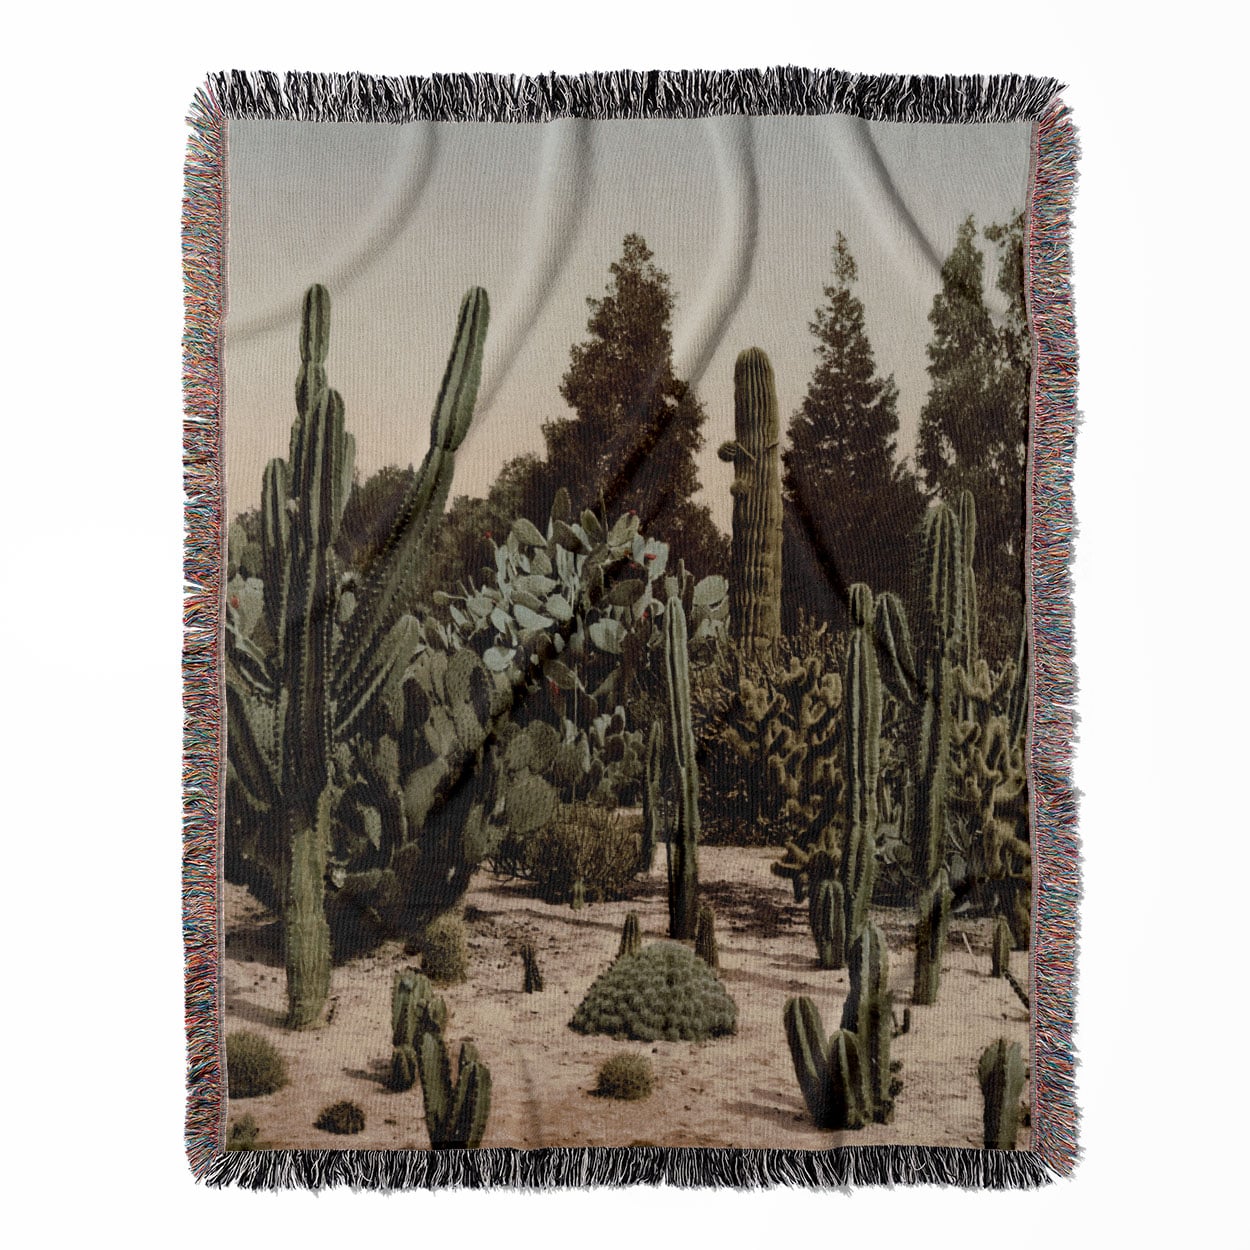 Desert Landscape woven throw blanket, crafted from 100% cotton, featuring a soft and cozy texture with a boho chic design for home decor.